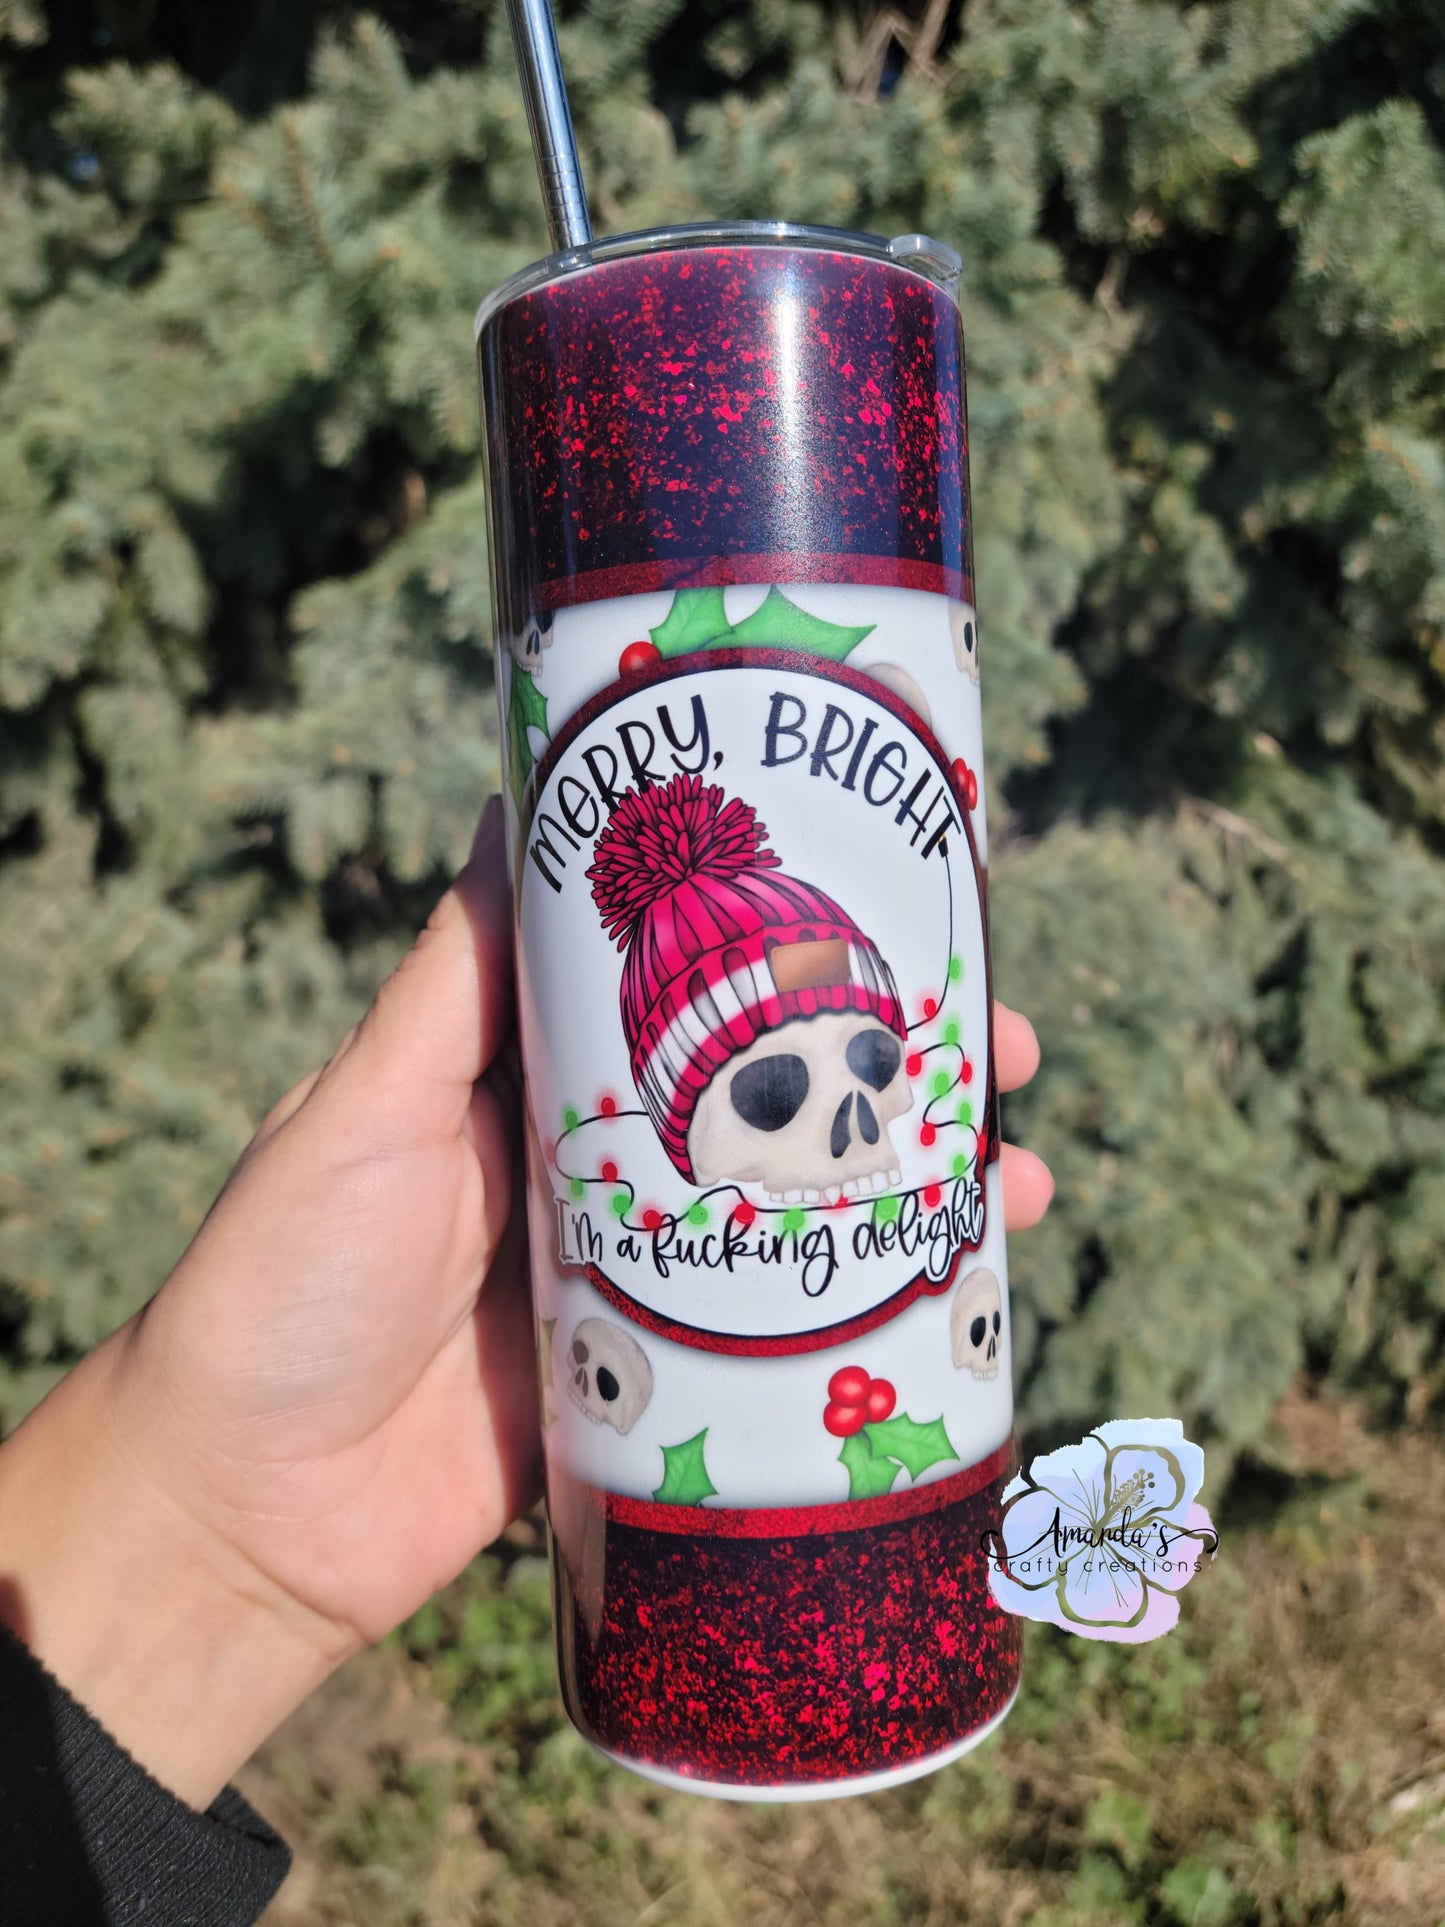 "Merry, Bright, I'm a fucking delight" 20 oz or 30 oz skinny metal tumbler, Merry and Bright, skull, I'm a fucking delight, Christmas, metal tumbler with straw